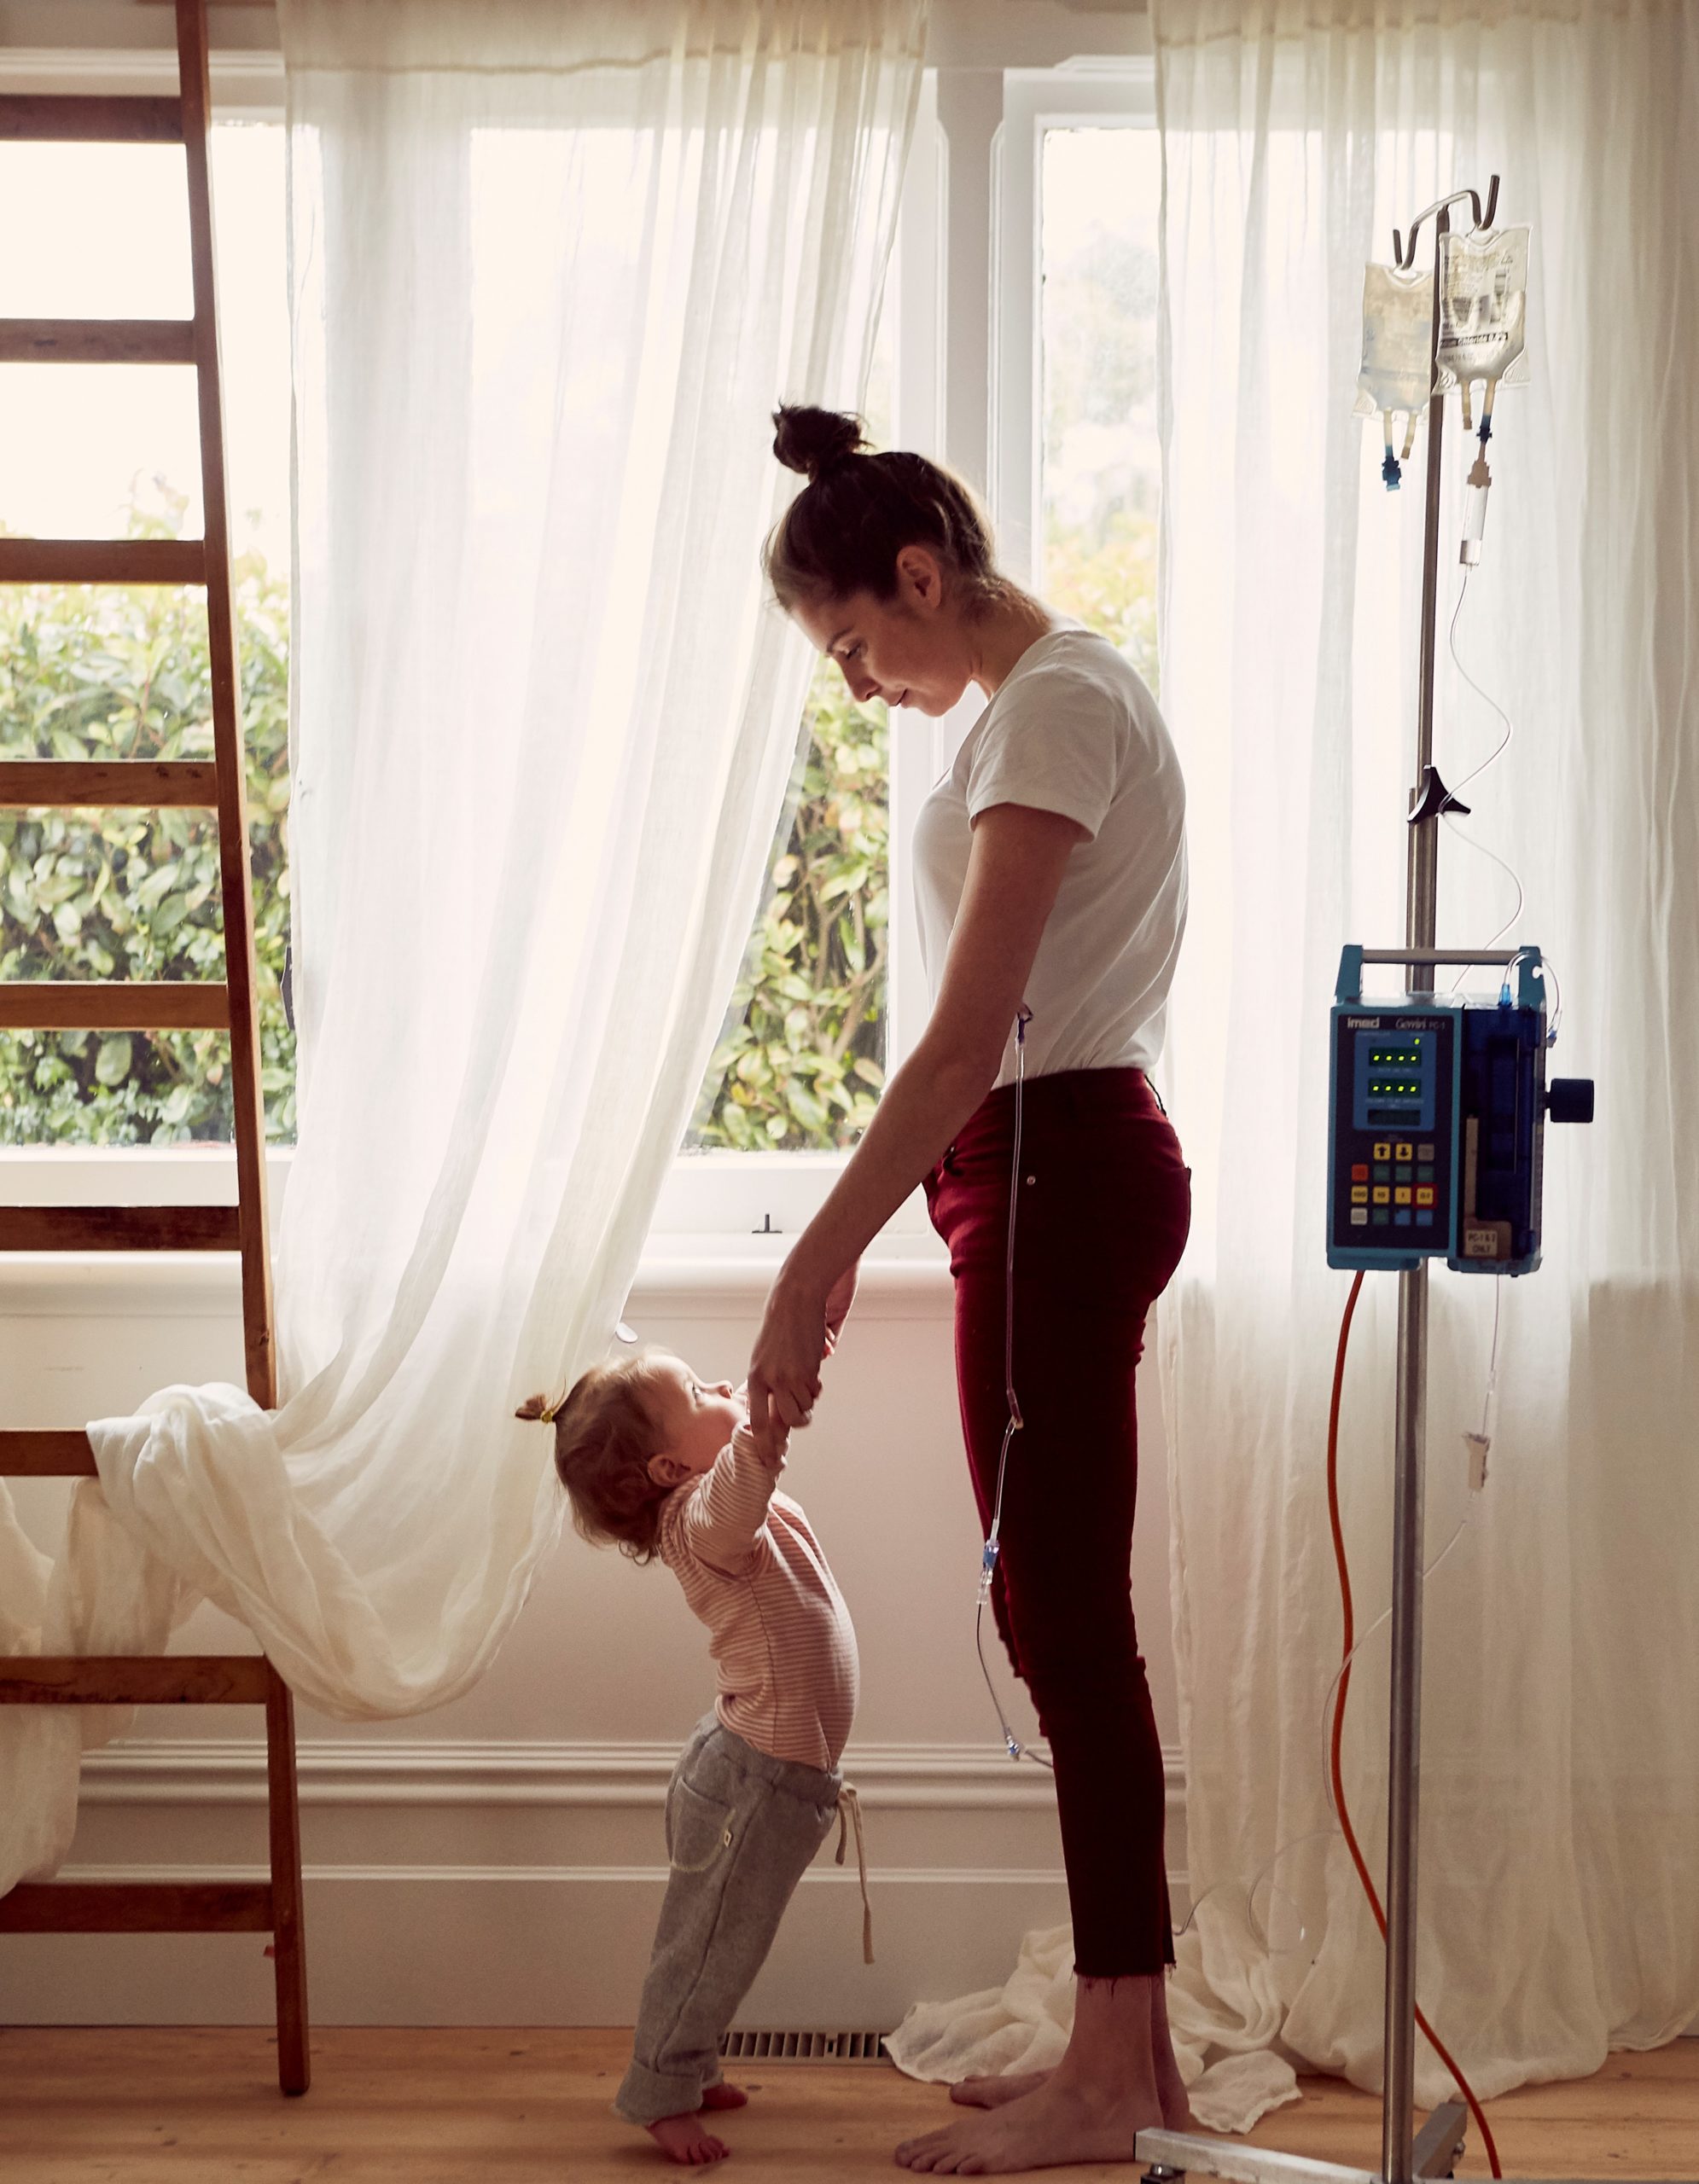 Alex and her child, facing each other and holding hands. Alex is connected to a medical device.